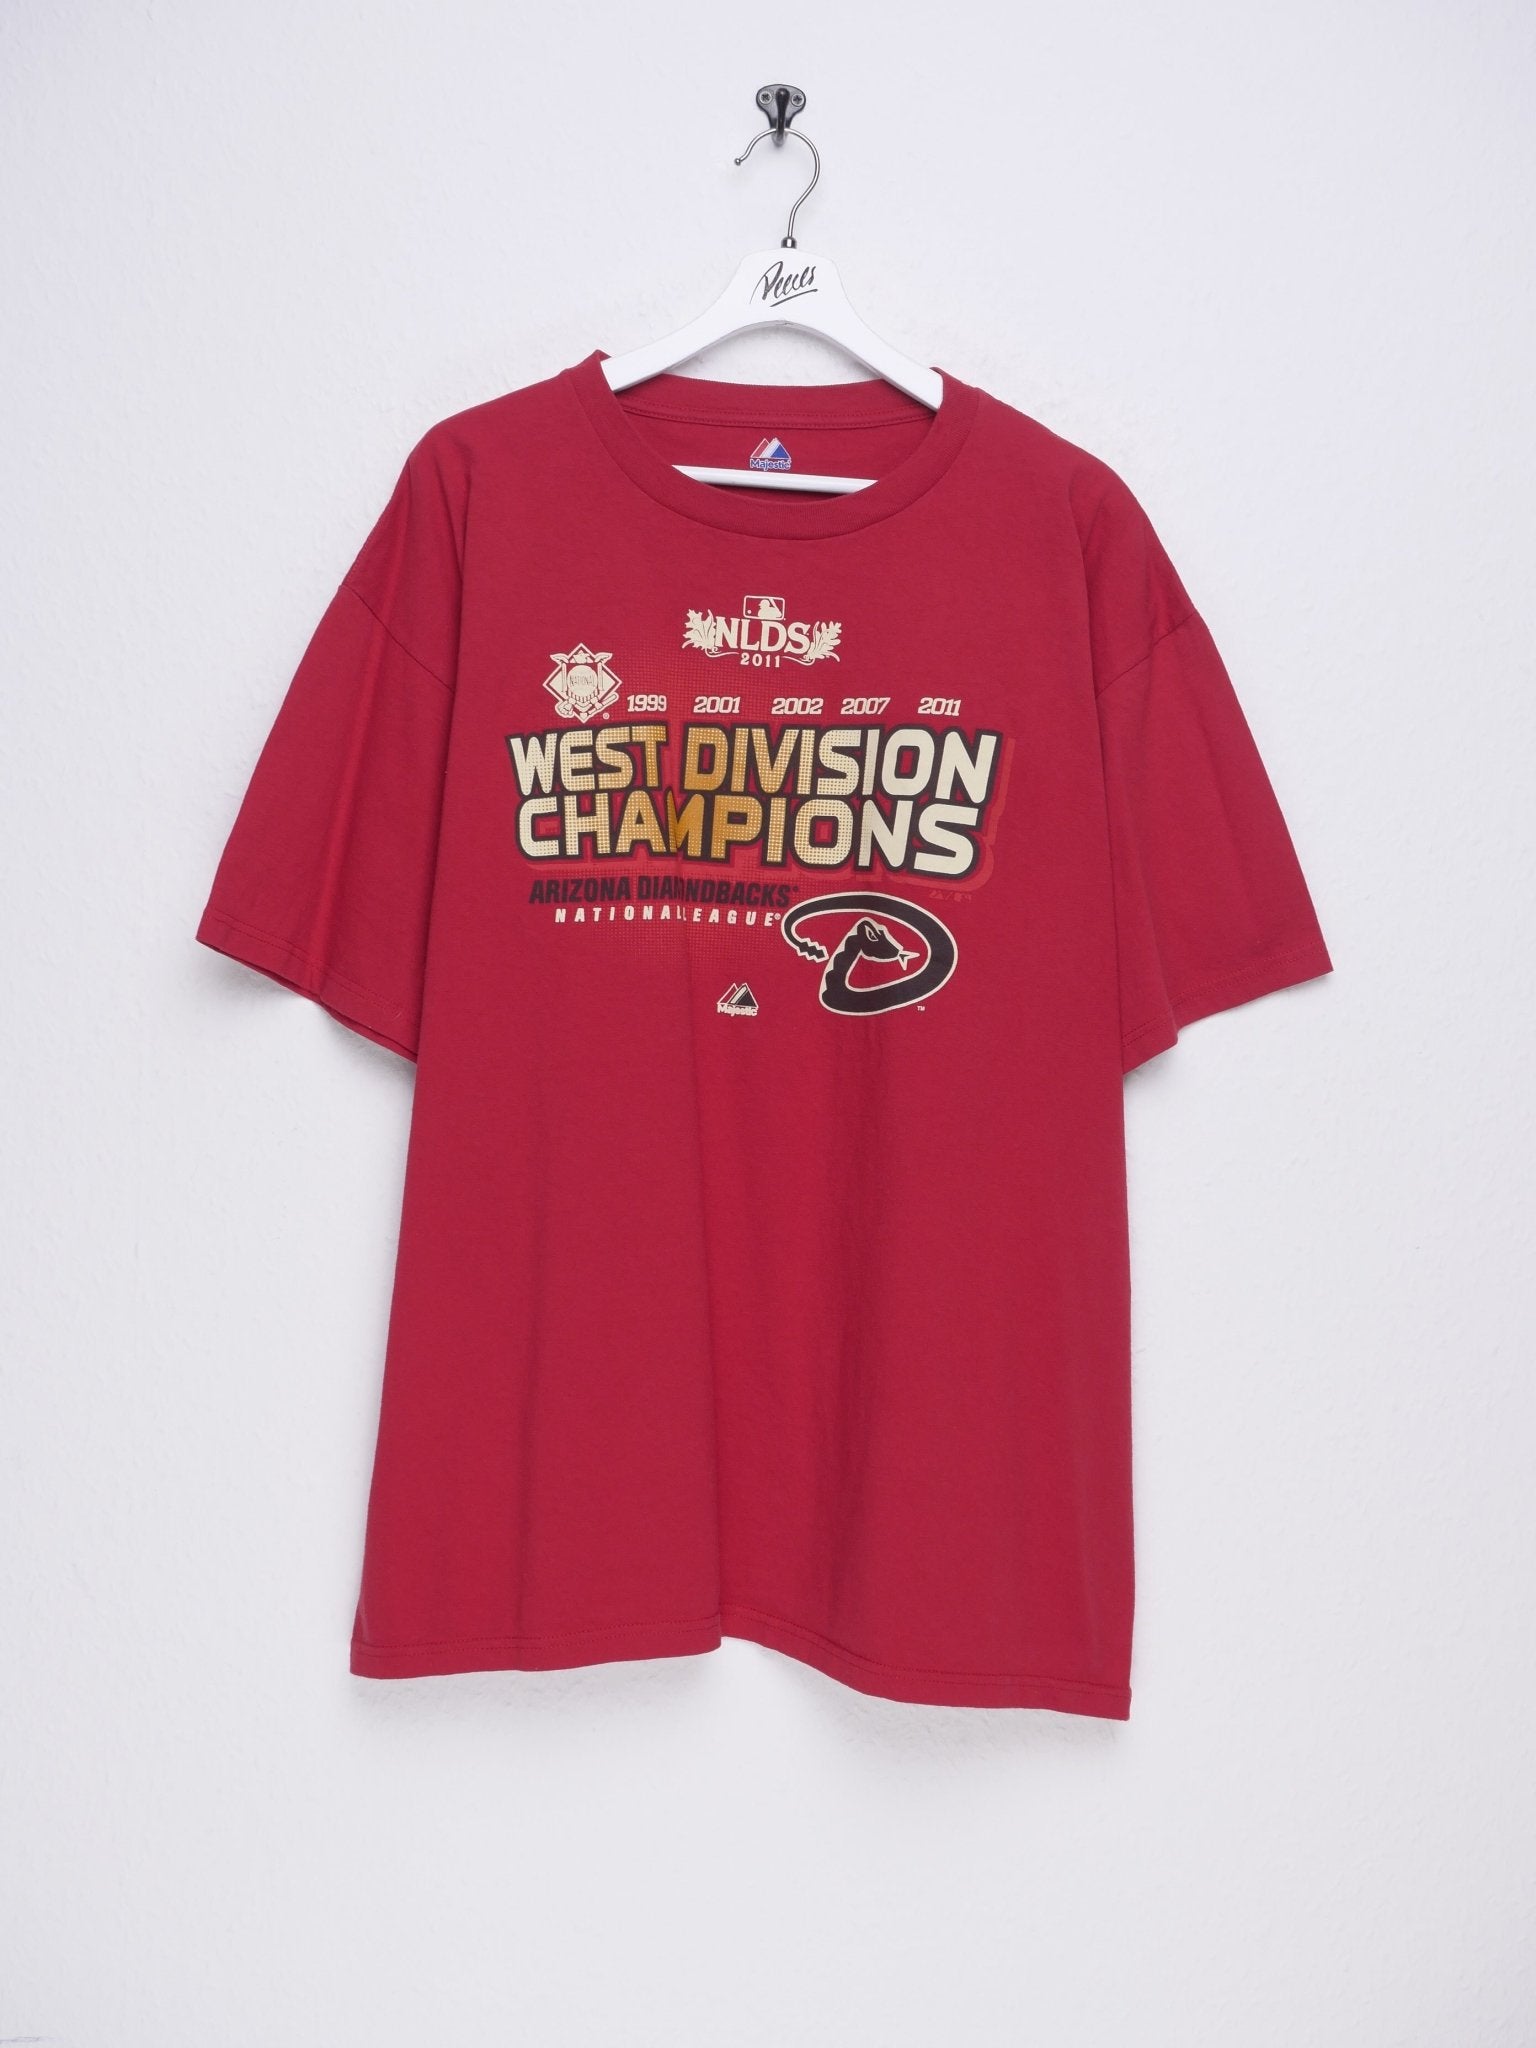 NLDS 2011 West Division Champions printed Graphic red Shirt - Peeces